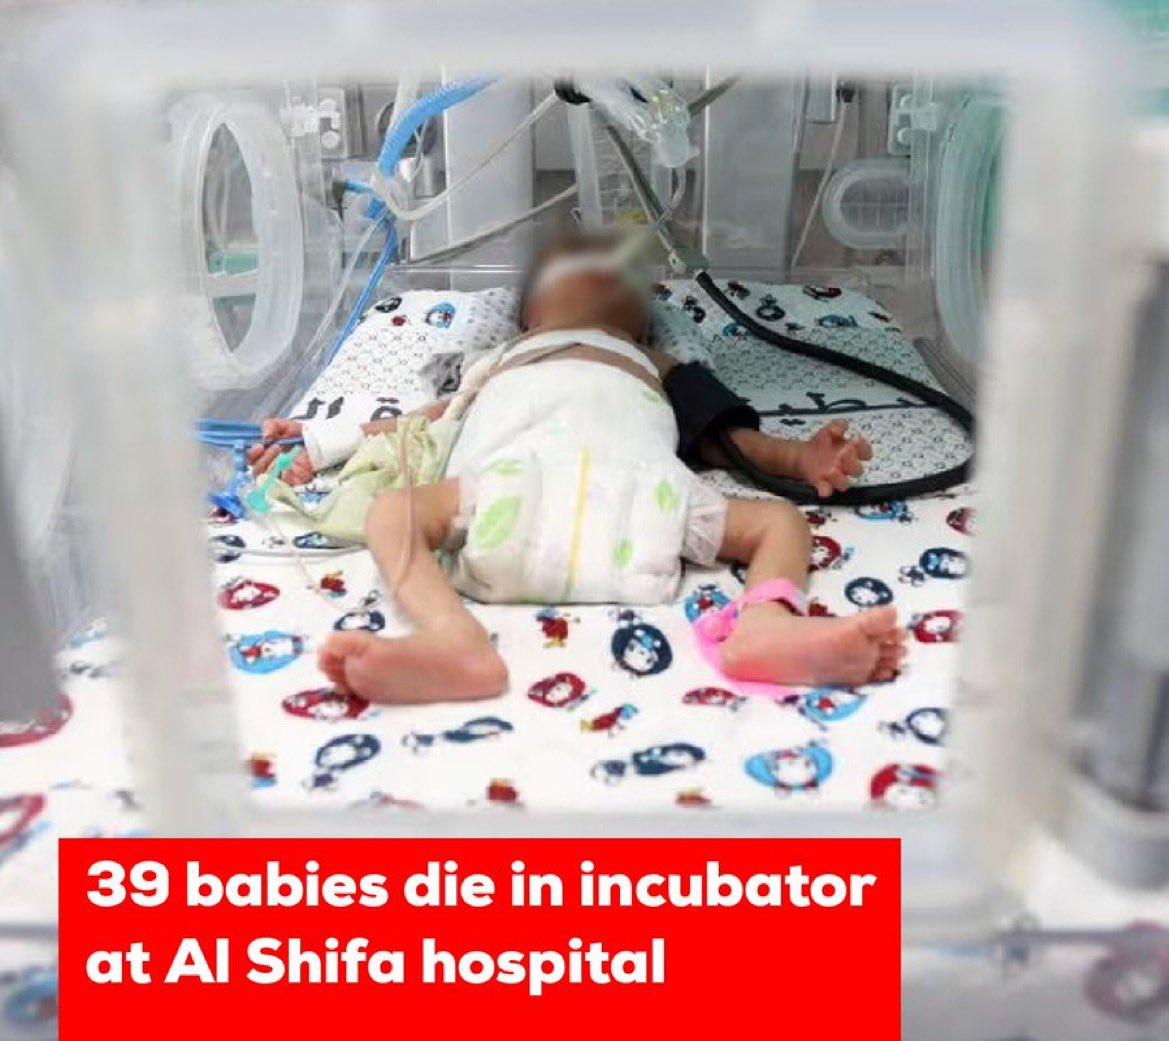 🚨🇮🇱 Israel just MURDERED 39 NEWBORN INFANTS in incubators by cutting off their oxygen in Gaza’s Al Shifa hospital.

🚨🇮🇱 This story is REAL unlike the 40 beheaded babies LIE.